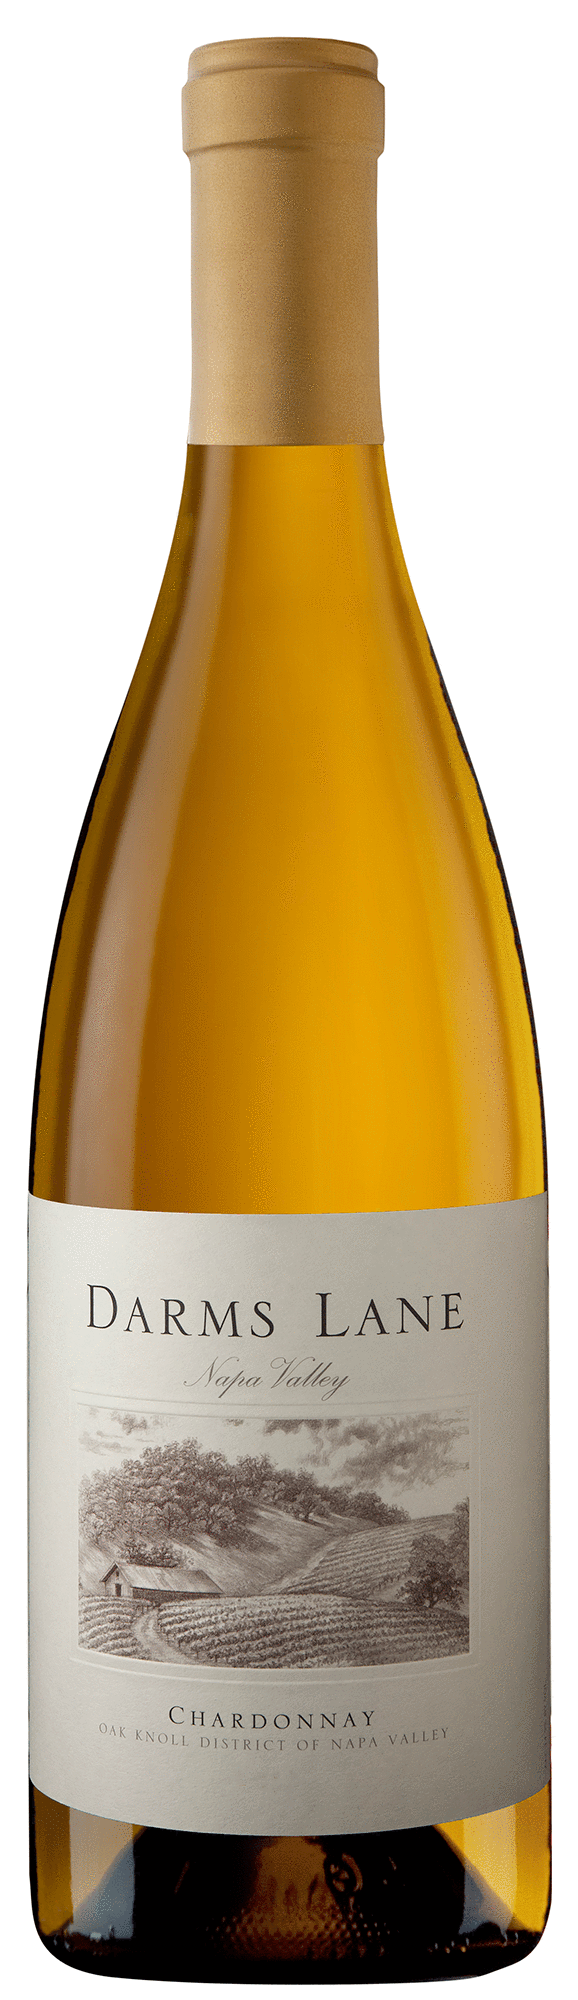 Product Image for 2019 Estate Chardonnay